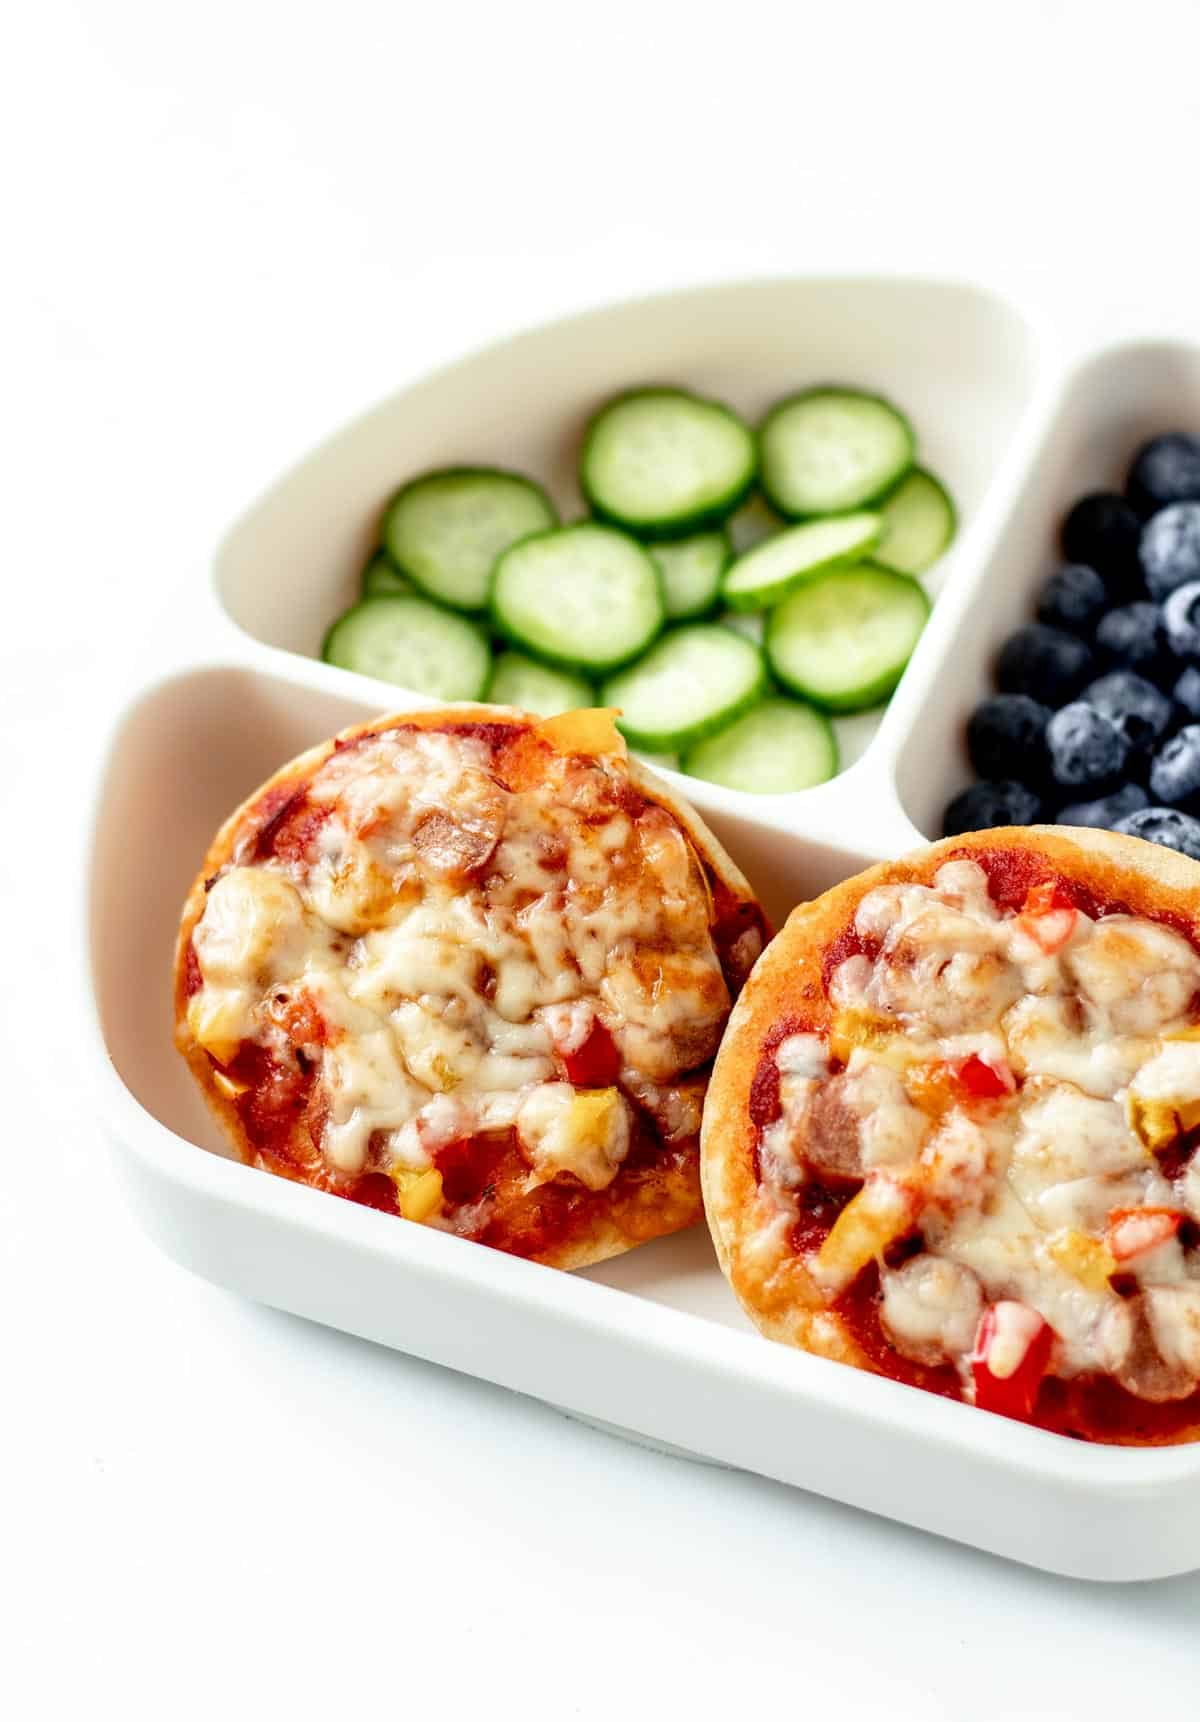 Two homemade mini pizzas on a plate with cucumbers and blueberries.